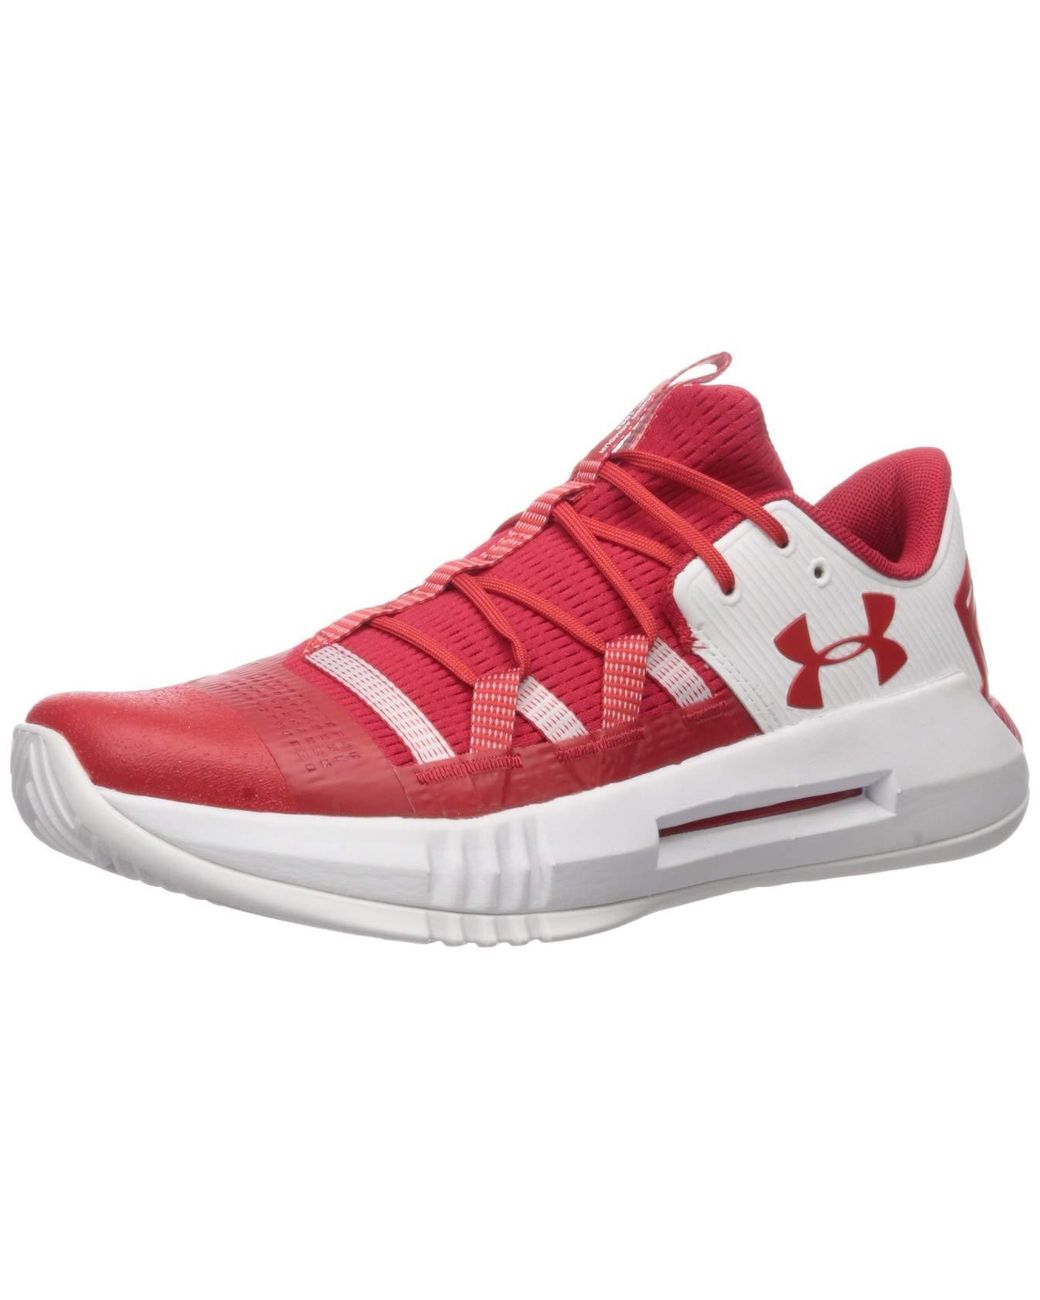 Under Armour Ua Block City 2.0 Volleyball Shoes in Red | Lyst